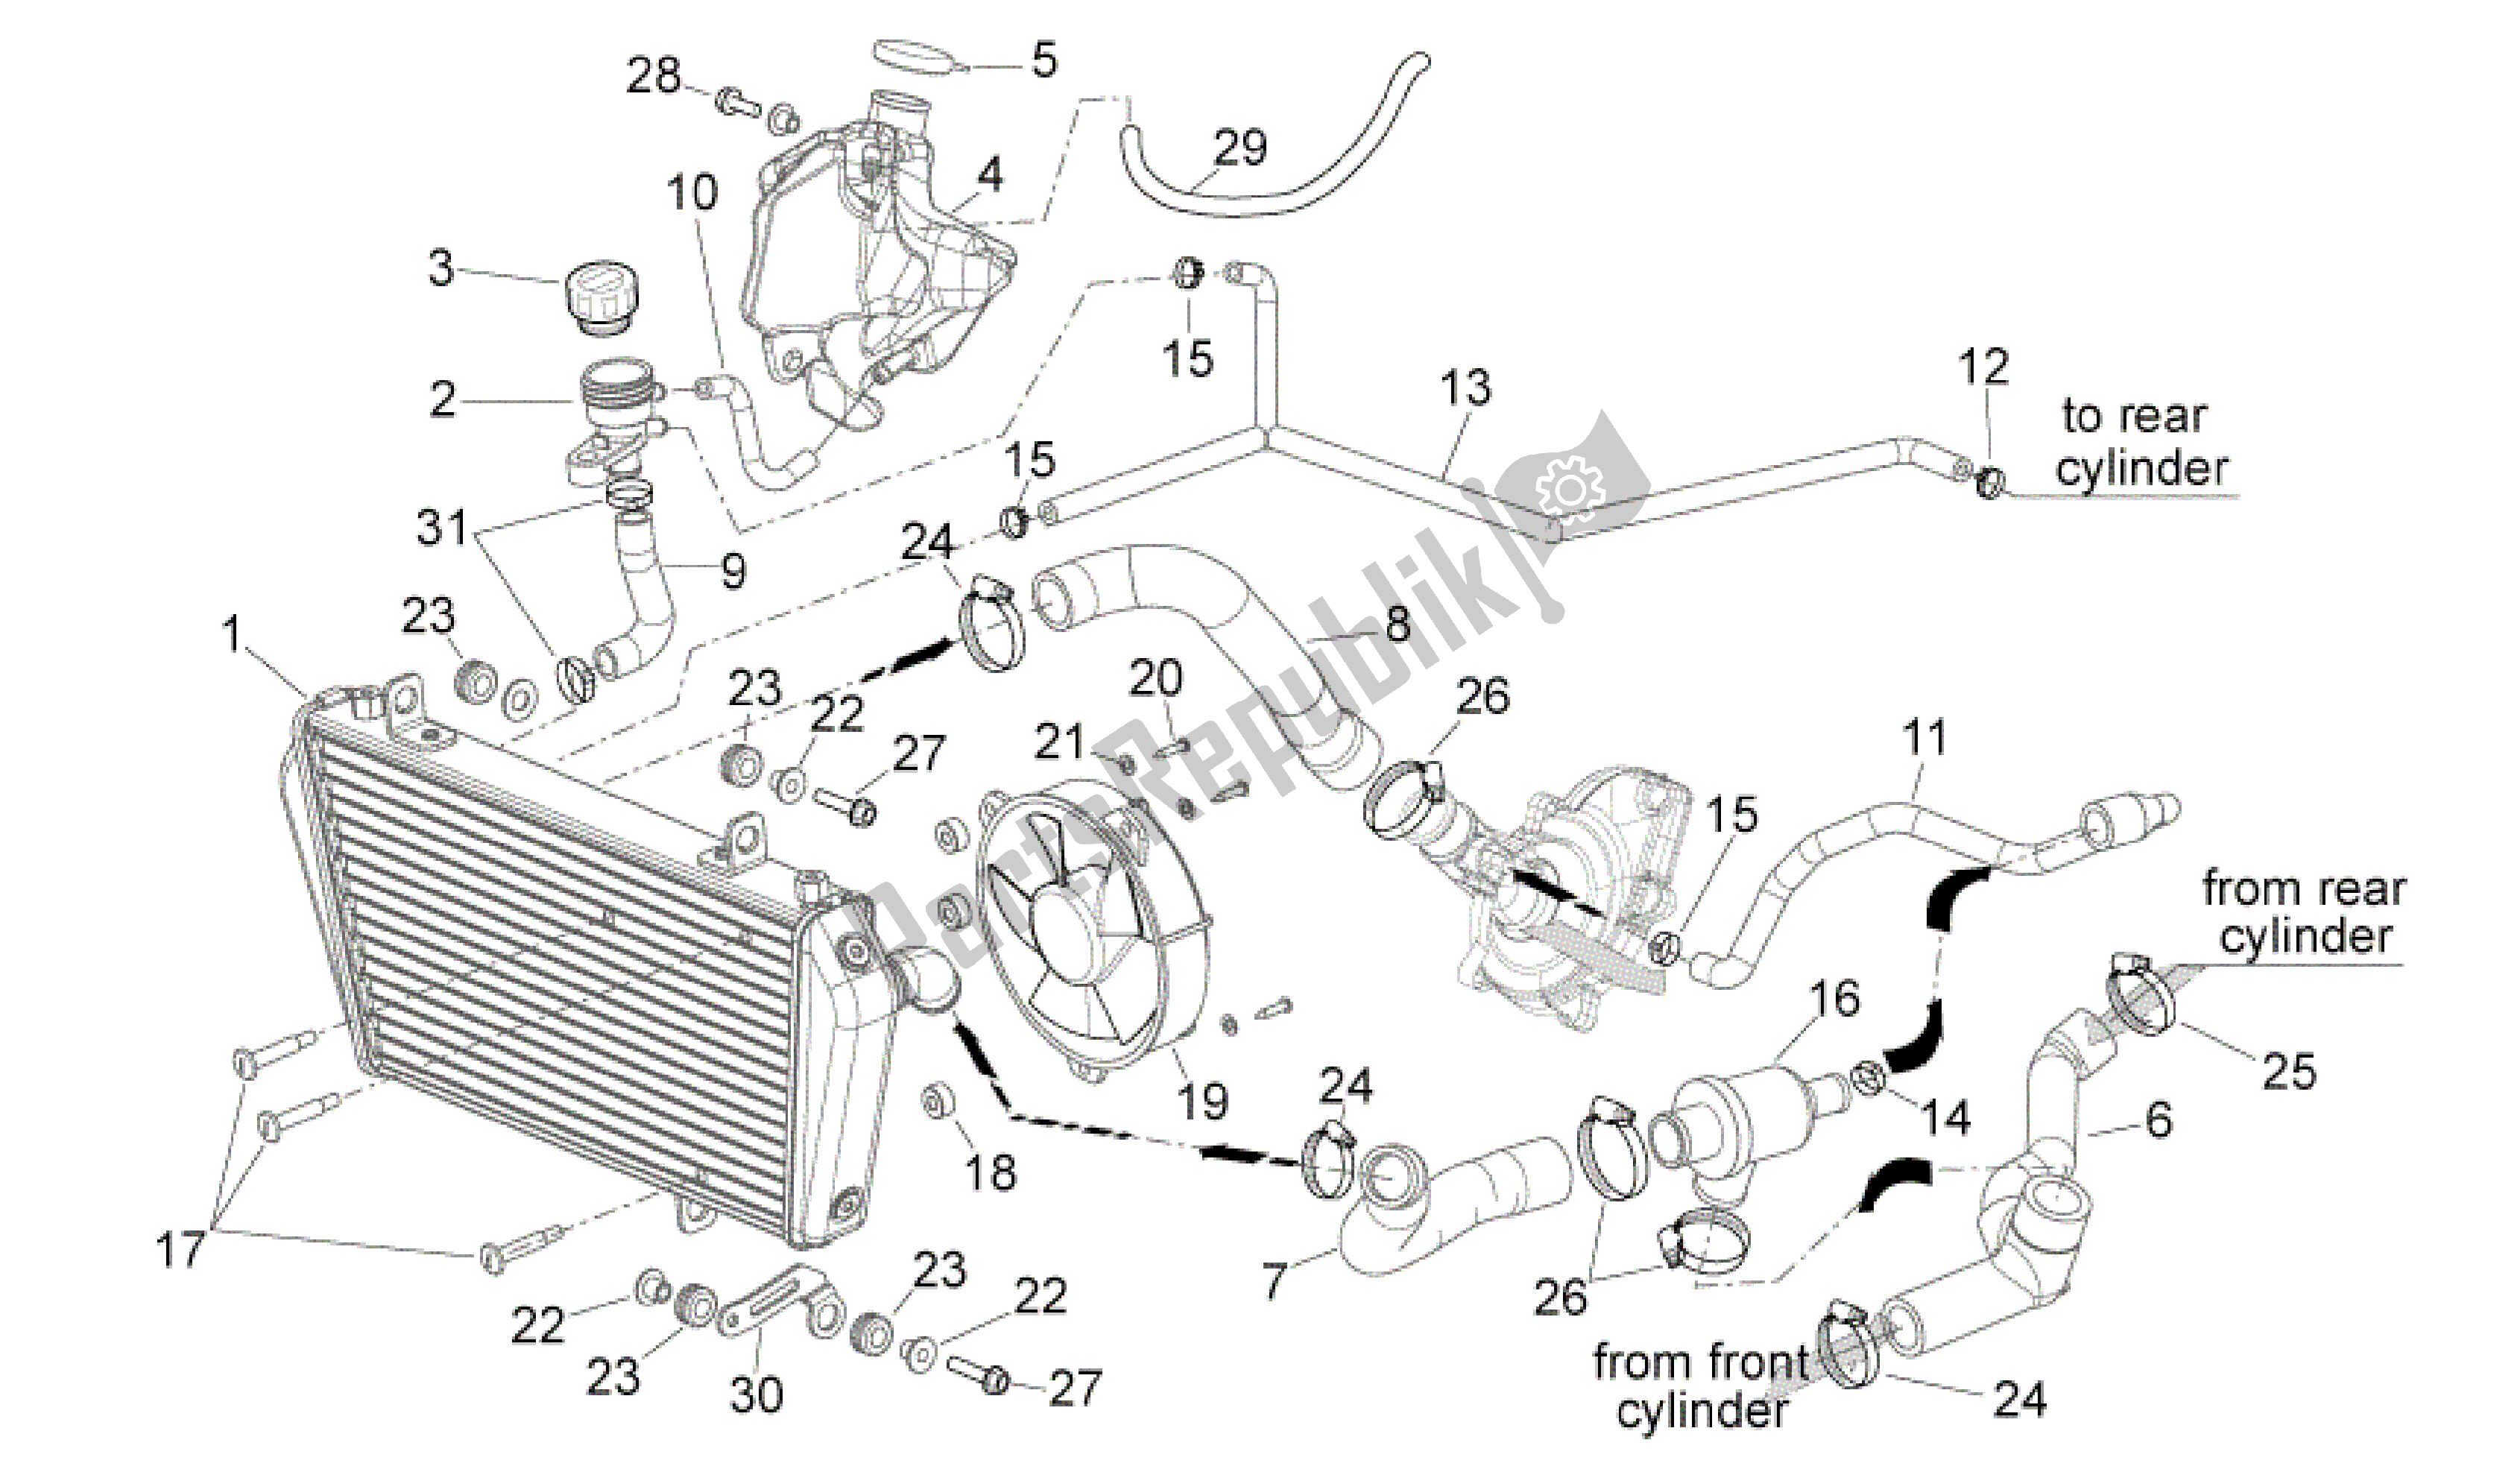 All parts for the Cooling System of the Aprilia Shiver 750 2009